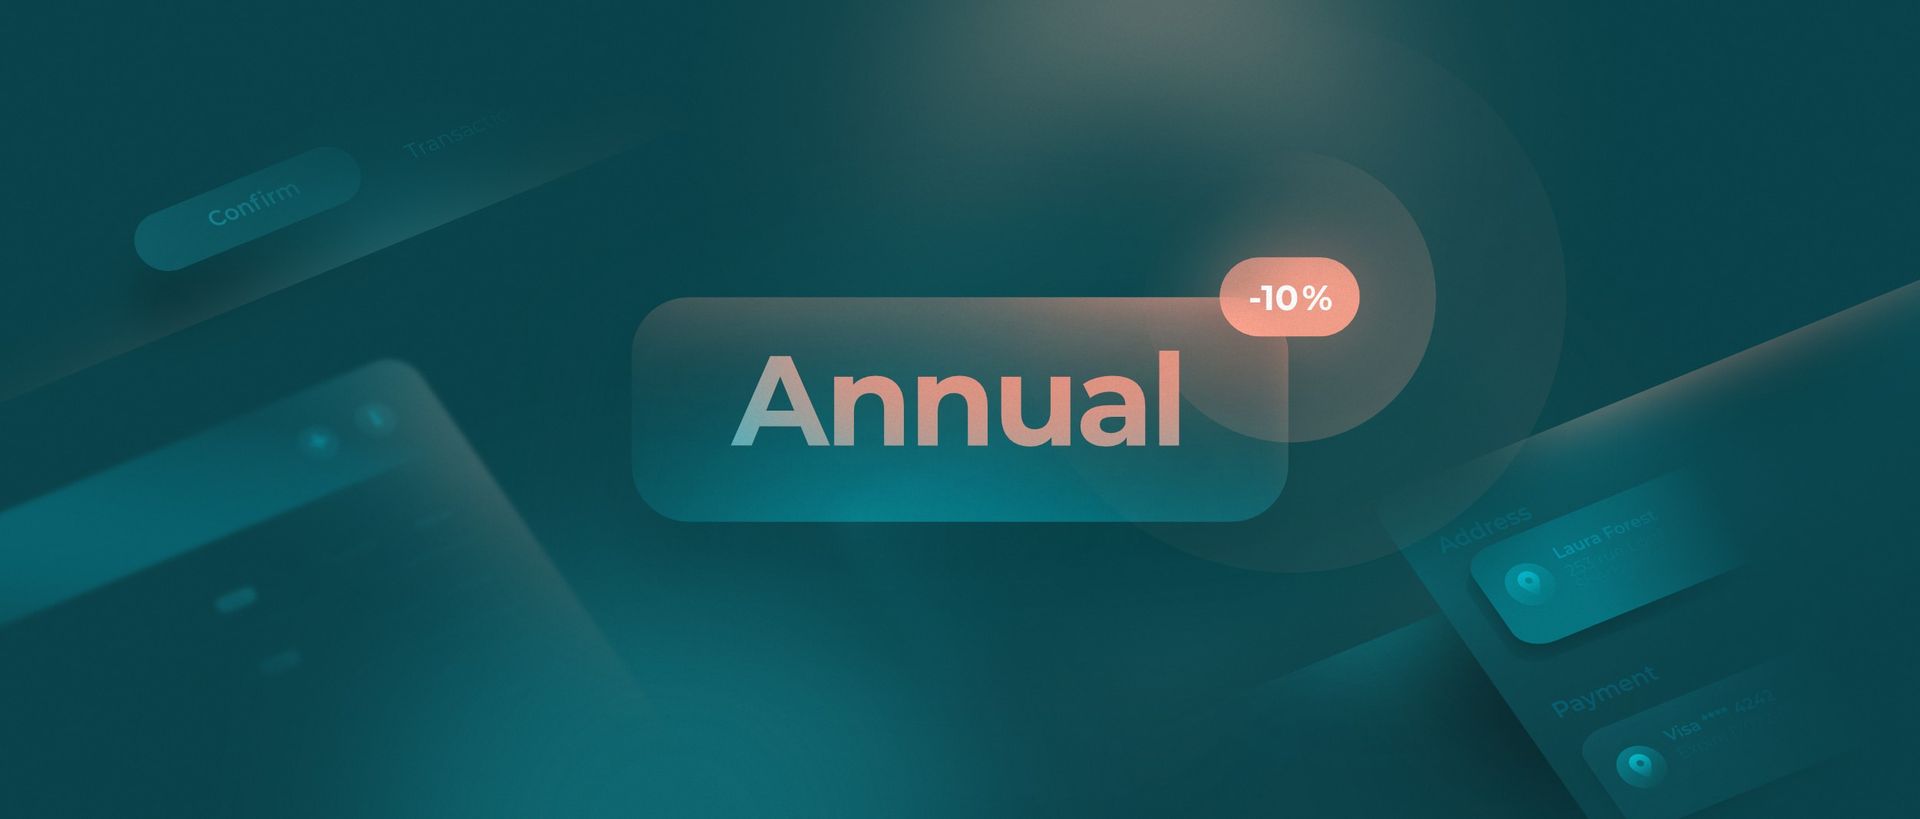 Annual subscription button with a 10% discount